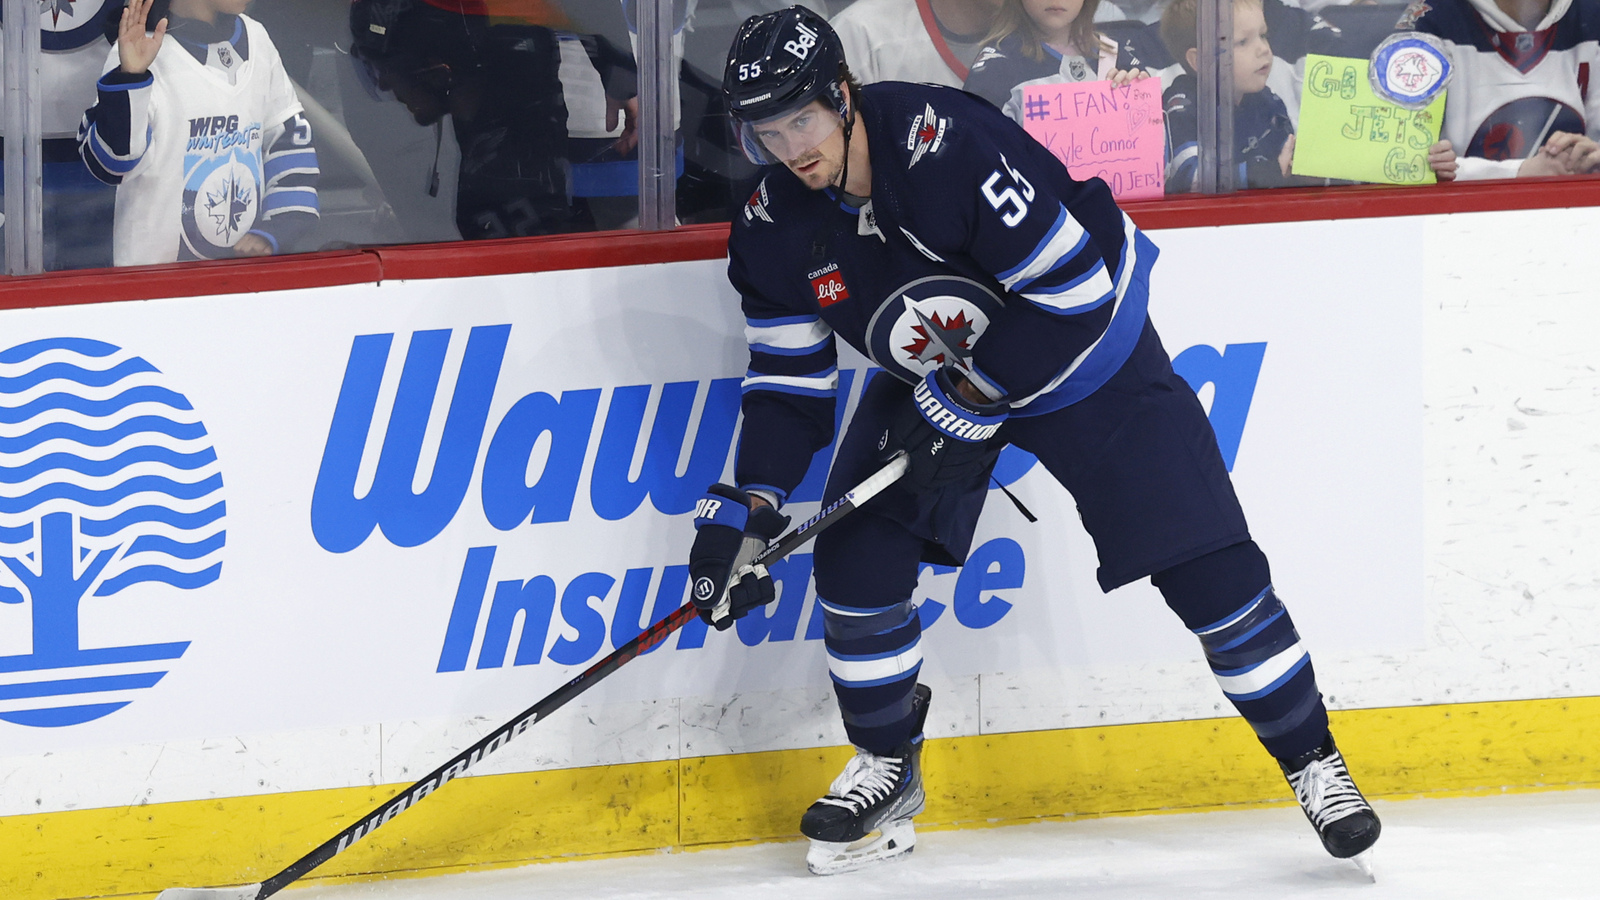 Jets’ Scheifele Situation Could Play Out Many Ways